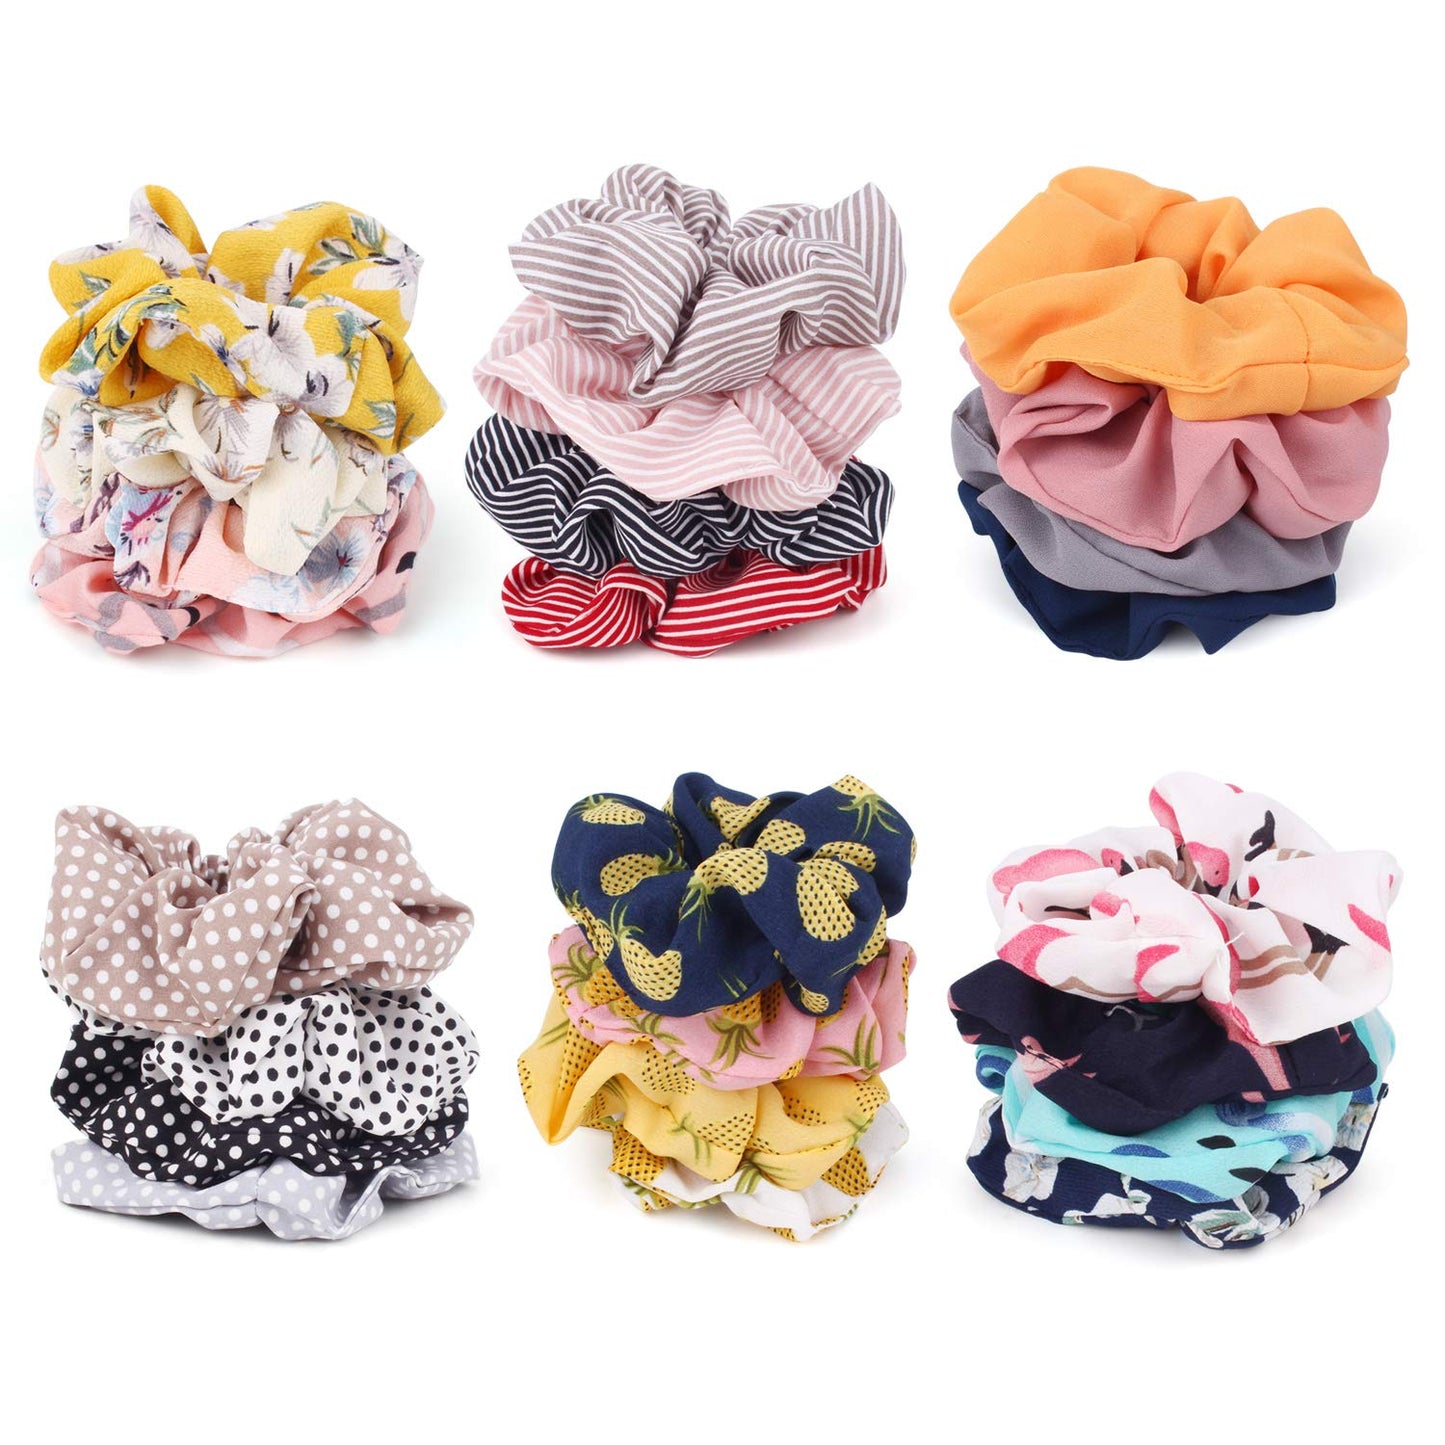 Buy online high quality Scrunchies - The Movement Boutique - Kelowna